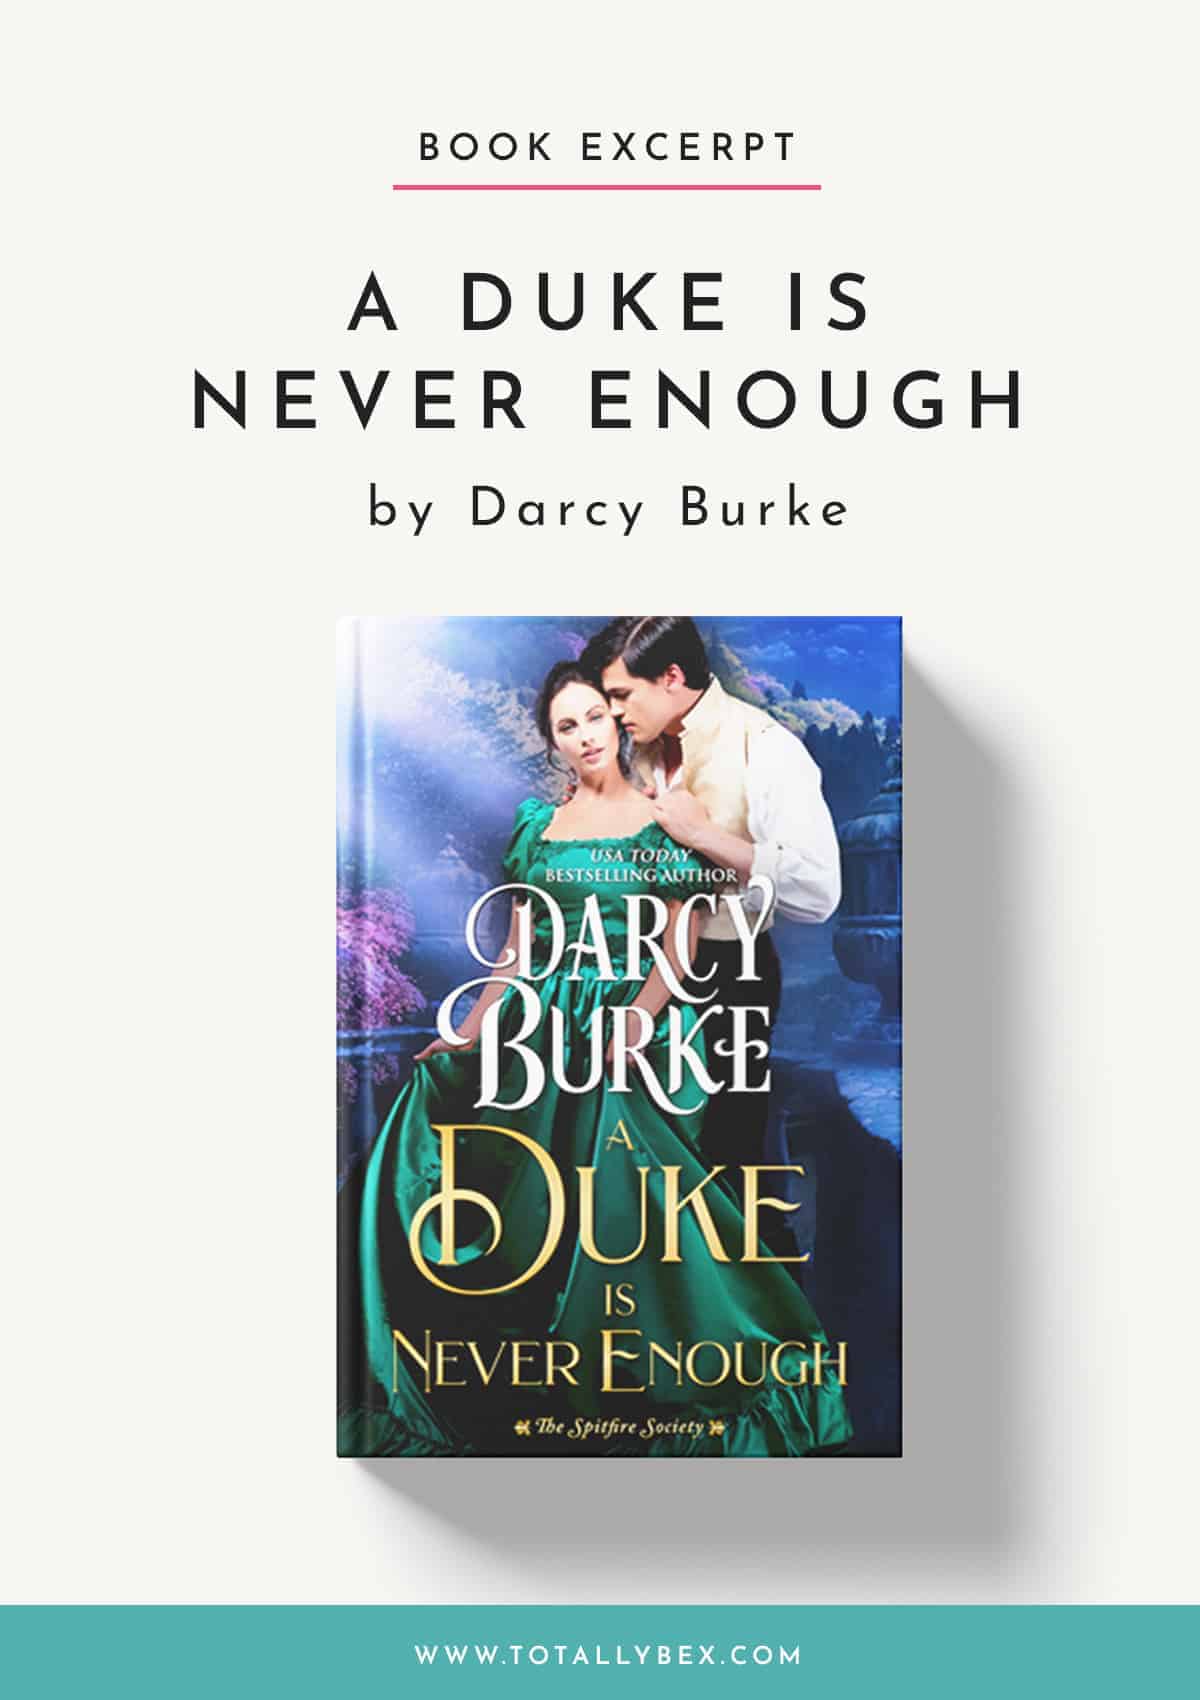 Enjoy this snippet from A Duke is Never Enough by Darcy Burke, a historical romance where a notorious rake is suspected of murder and a self-declared spinster spitfire may be his only hope